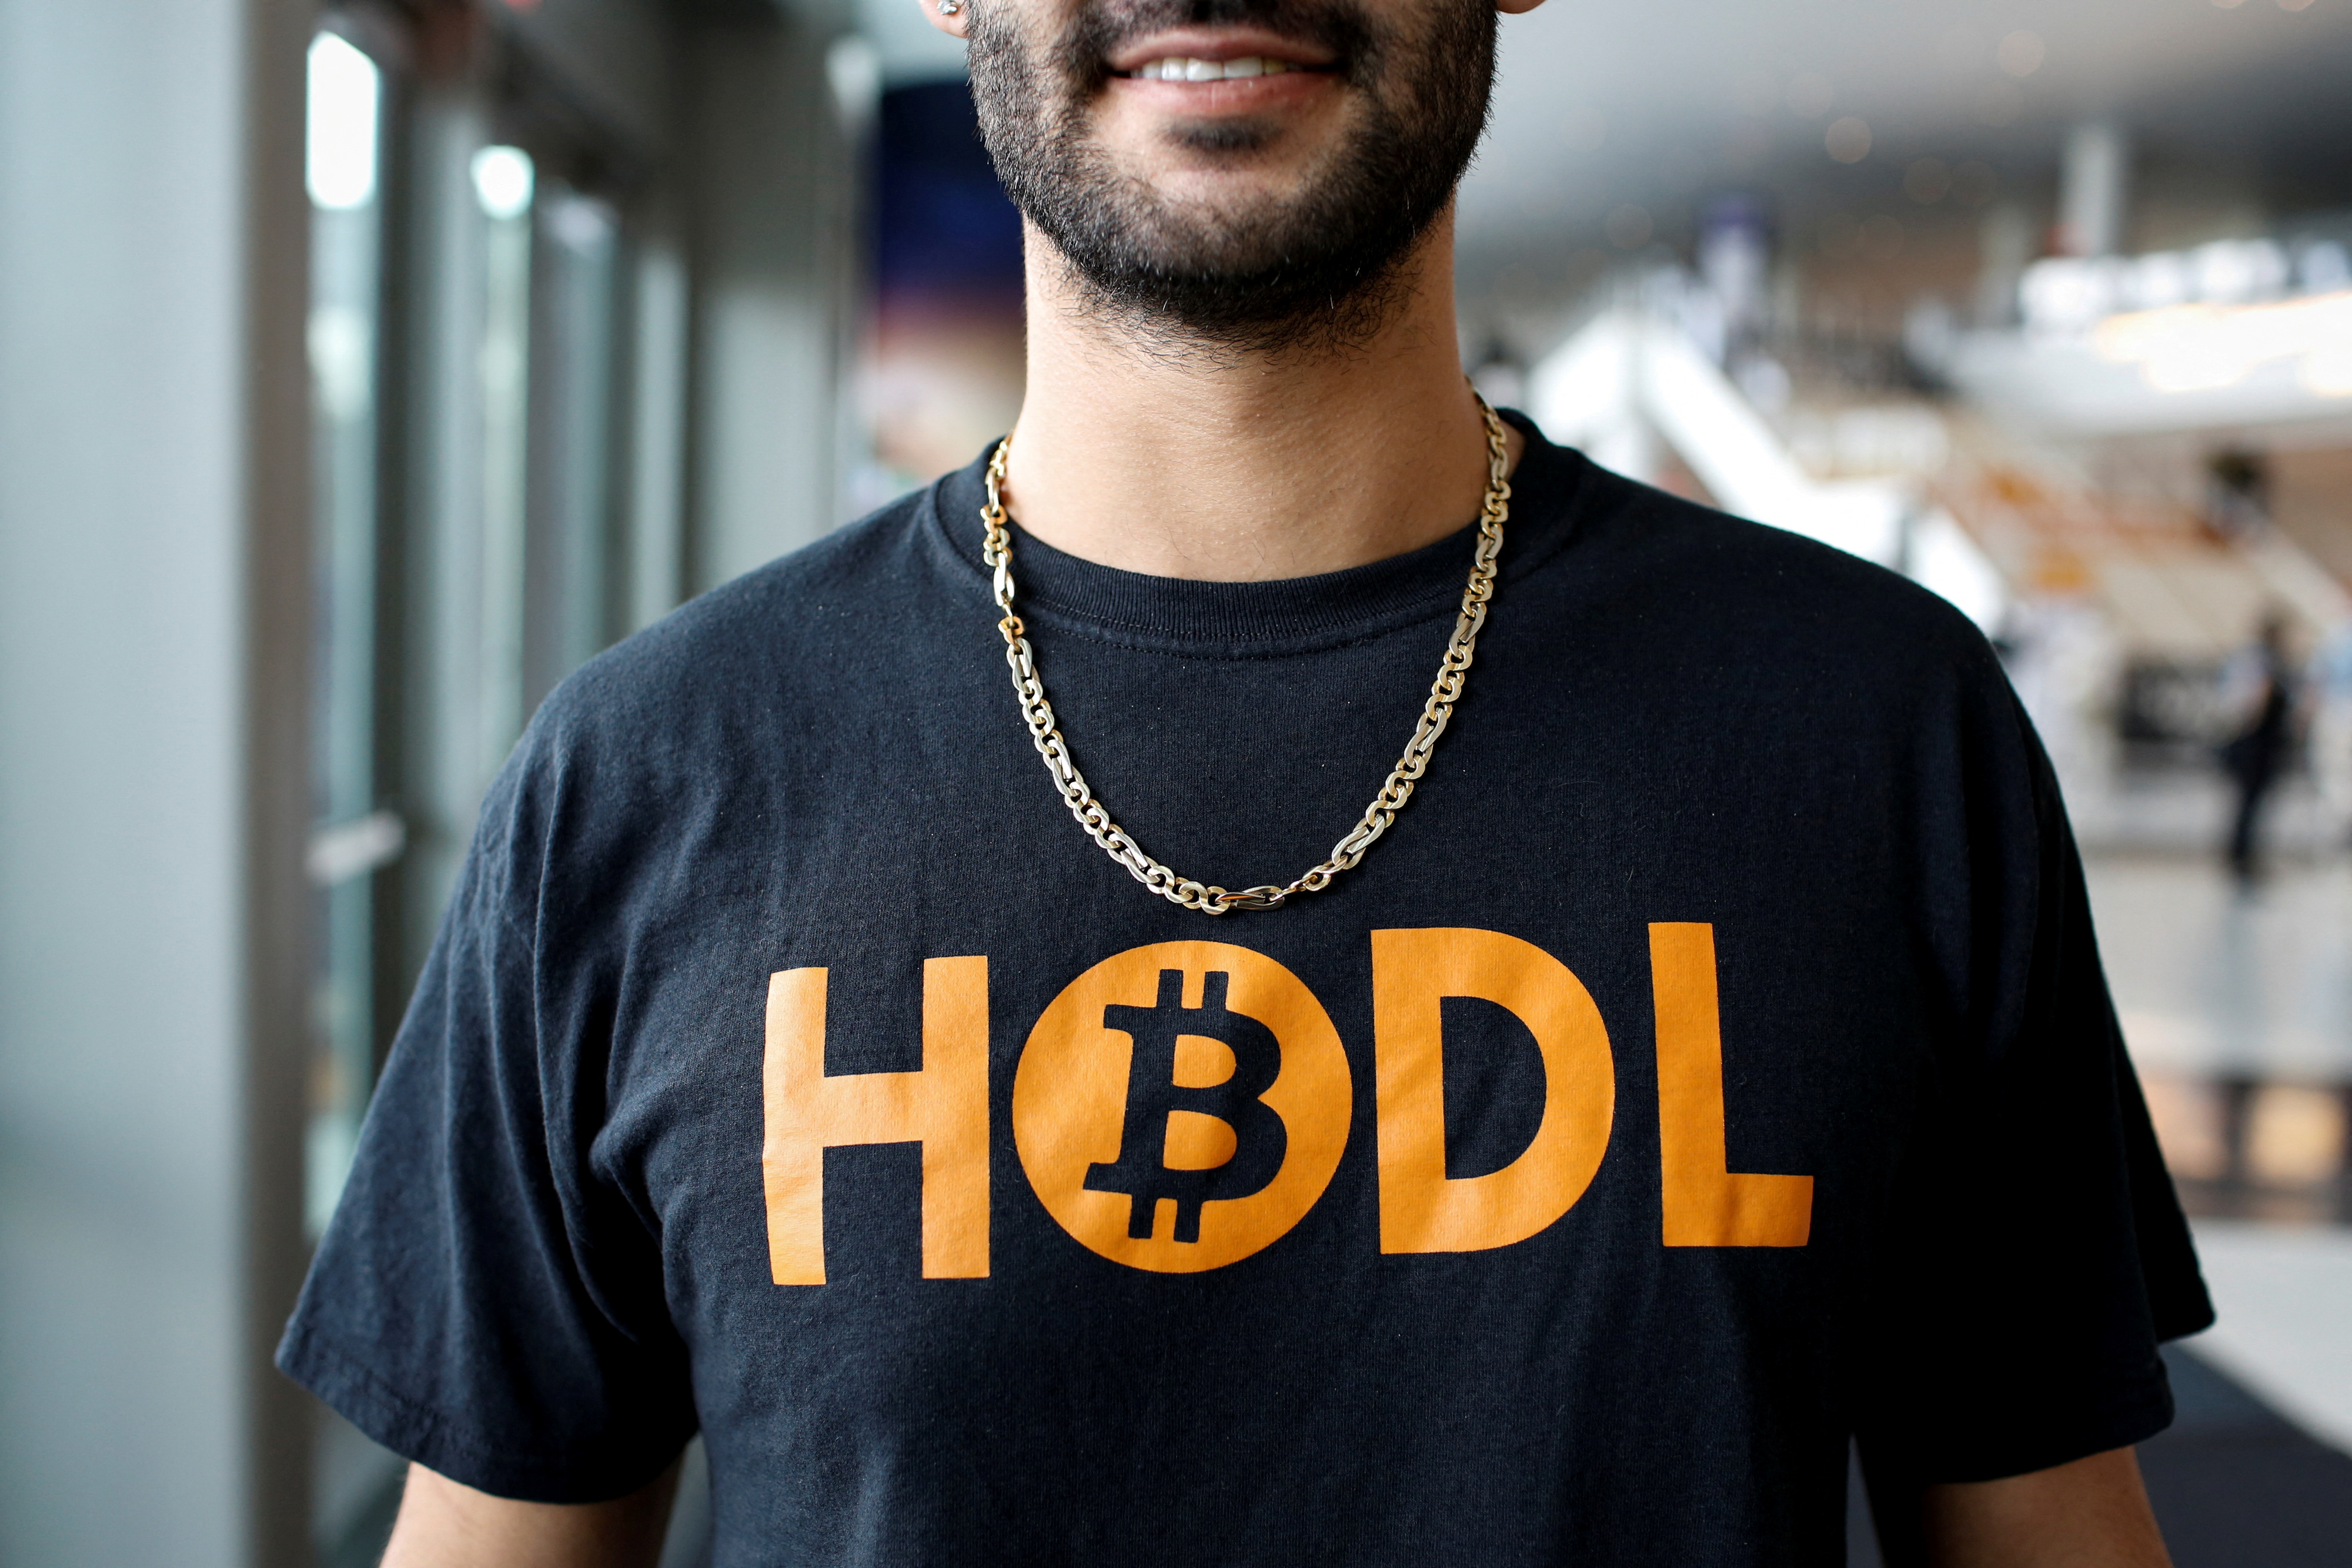 Investing Shirt Trader shirt Crypto Shirt Cryptocurrency I Told You So Crypto shirt HODL Power To The Trader Bit Coin